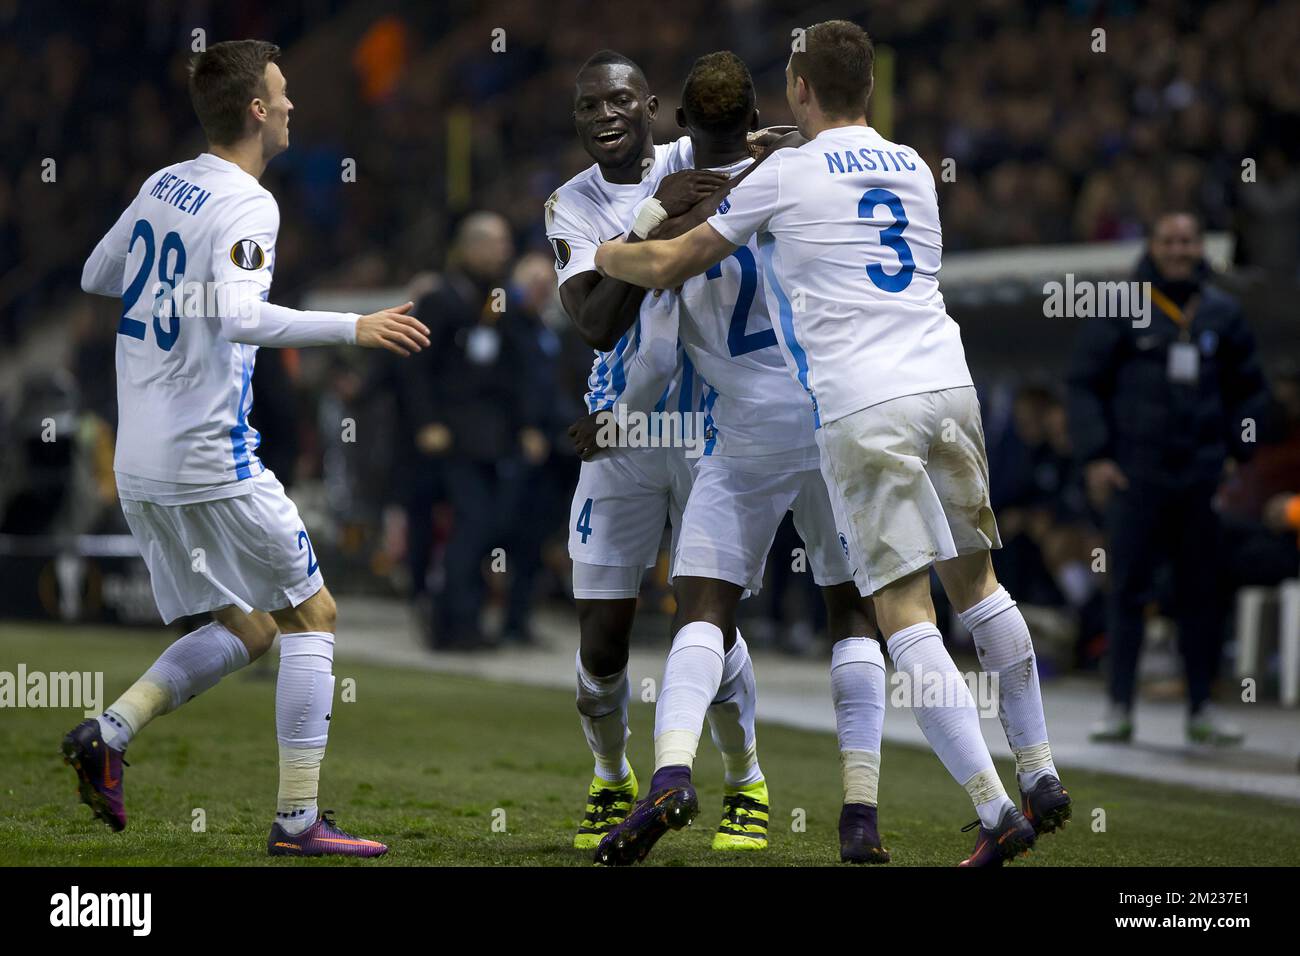 Genk's Brian Heynen, Genk's Omar Colley, Genk's Wilfried Onyinye Ndidi and Genk's Bojan Nastic celebrate after scoring during a third game of the group stage (group F) of the Europa League competition between Belgian soccer team RC Genk and Portuguese soccer team Athletic Bilbao, Thursday 20 October 2016, in Genk. BELGA PHOTO KRISTOF VAN ACCOM Stock Photo